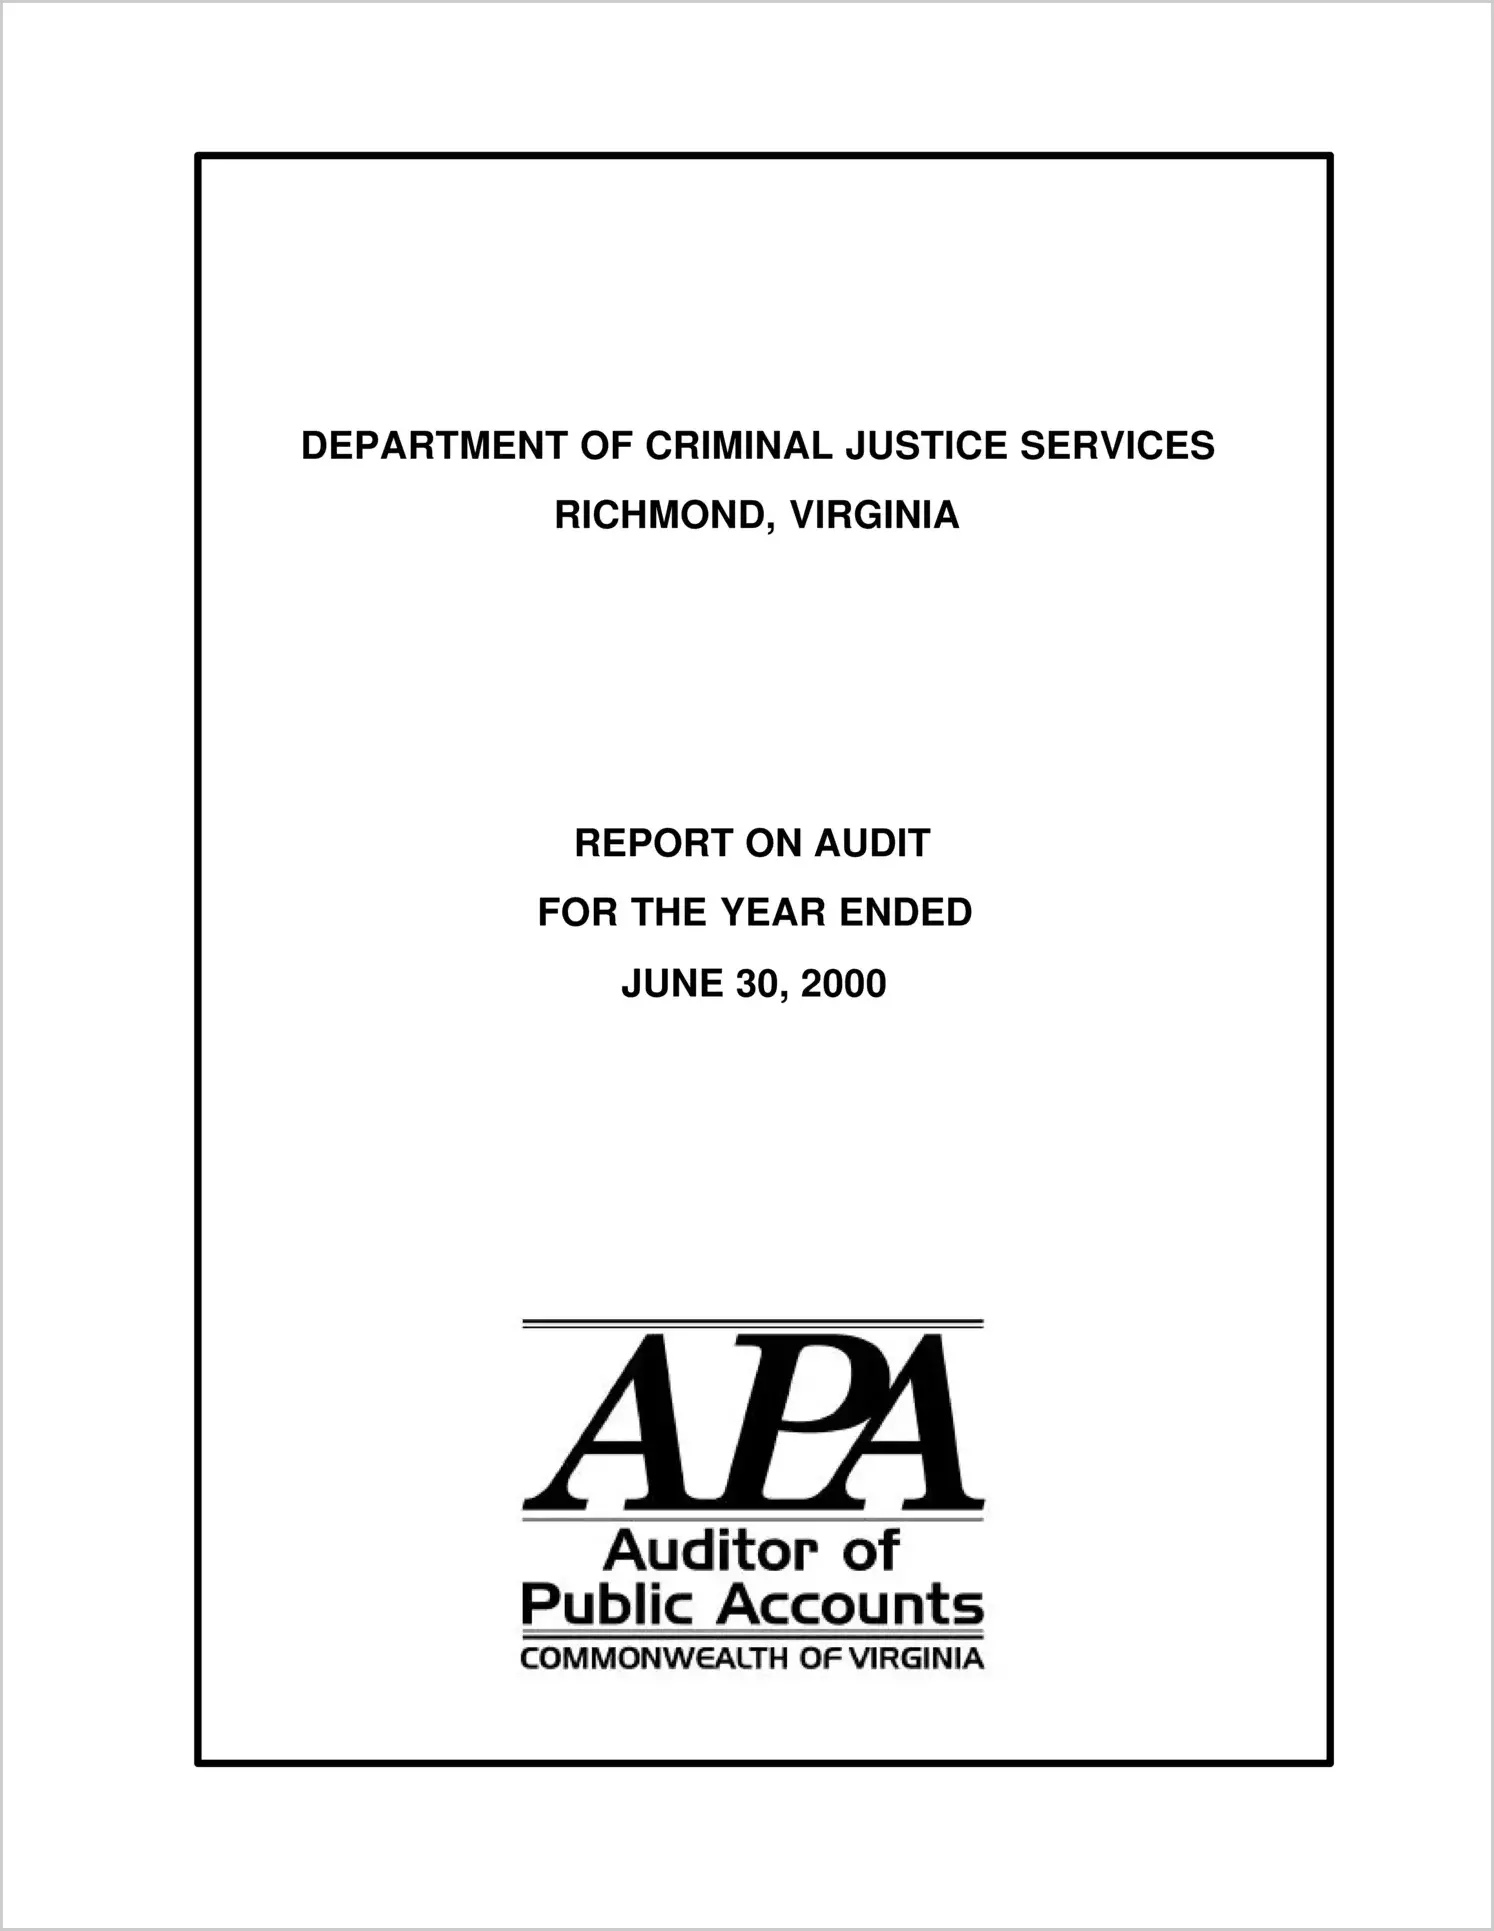 Department of Criminal Justice Services for the year ended June 30, 2000